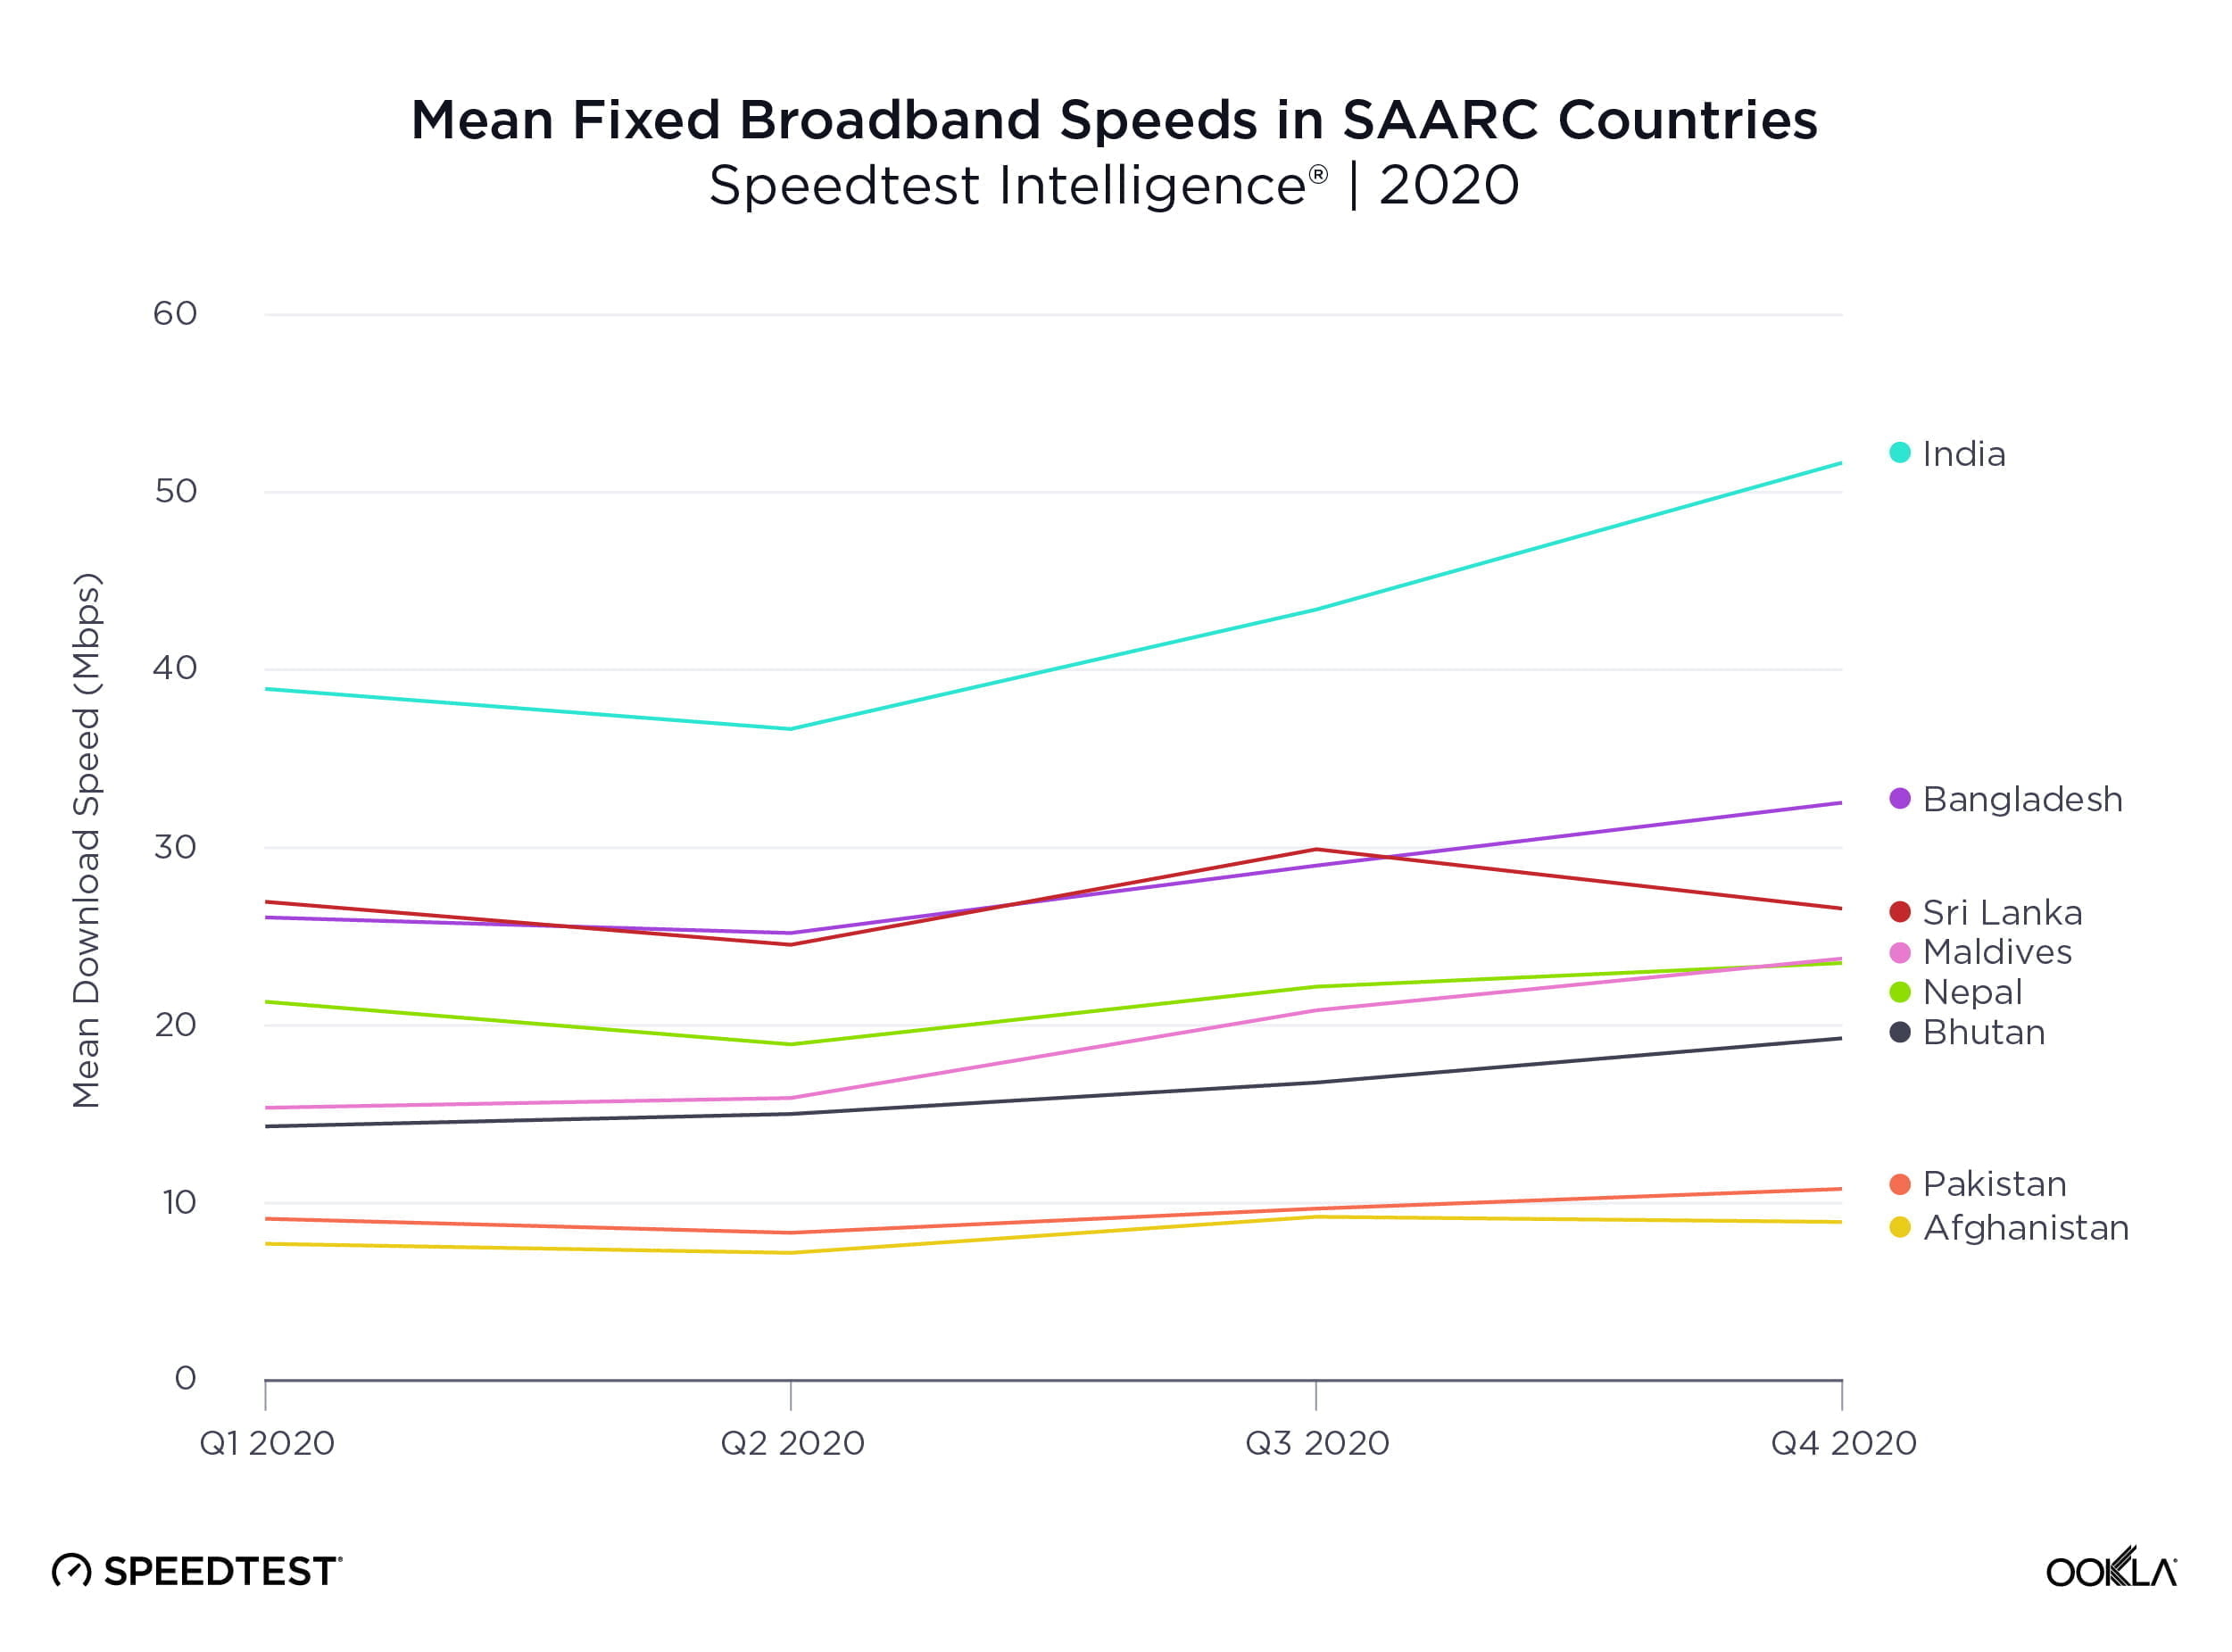 India's fixed broadband fast for SAARC countries but Indian mobile speed lags: Ookla Q4 2020 report